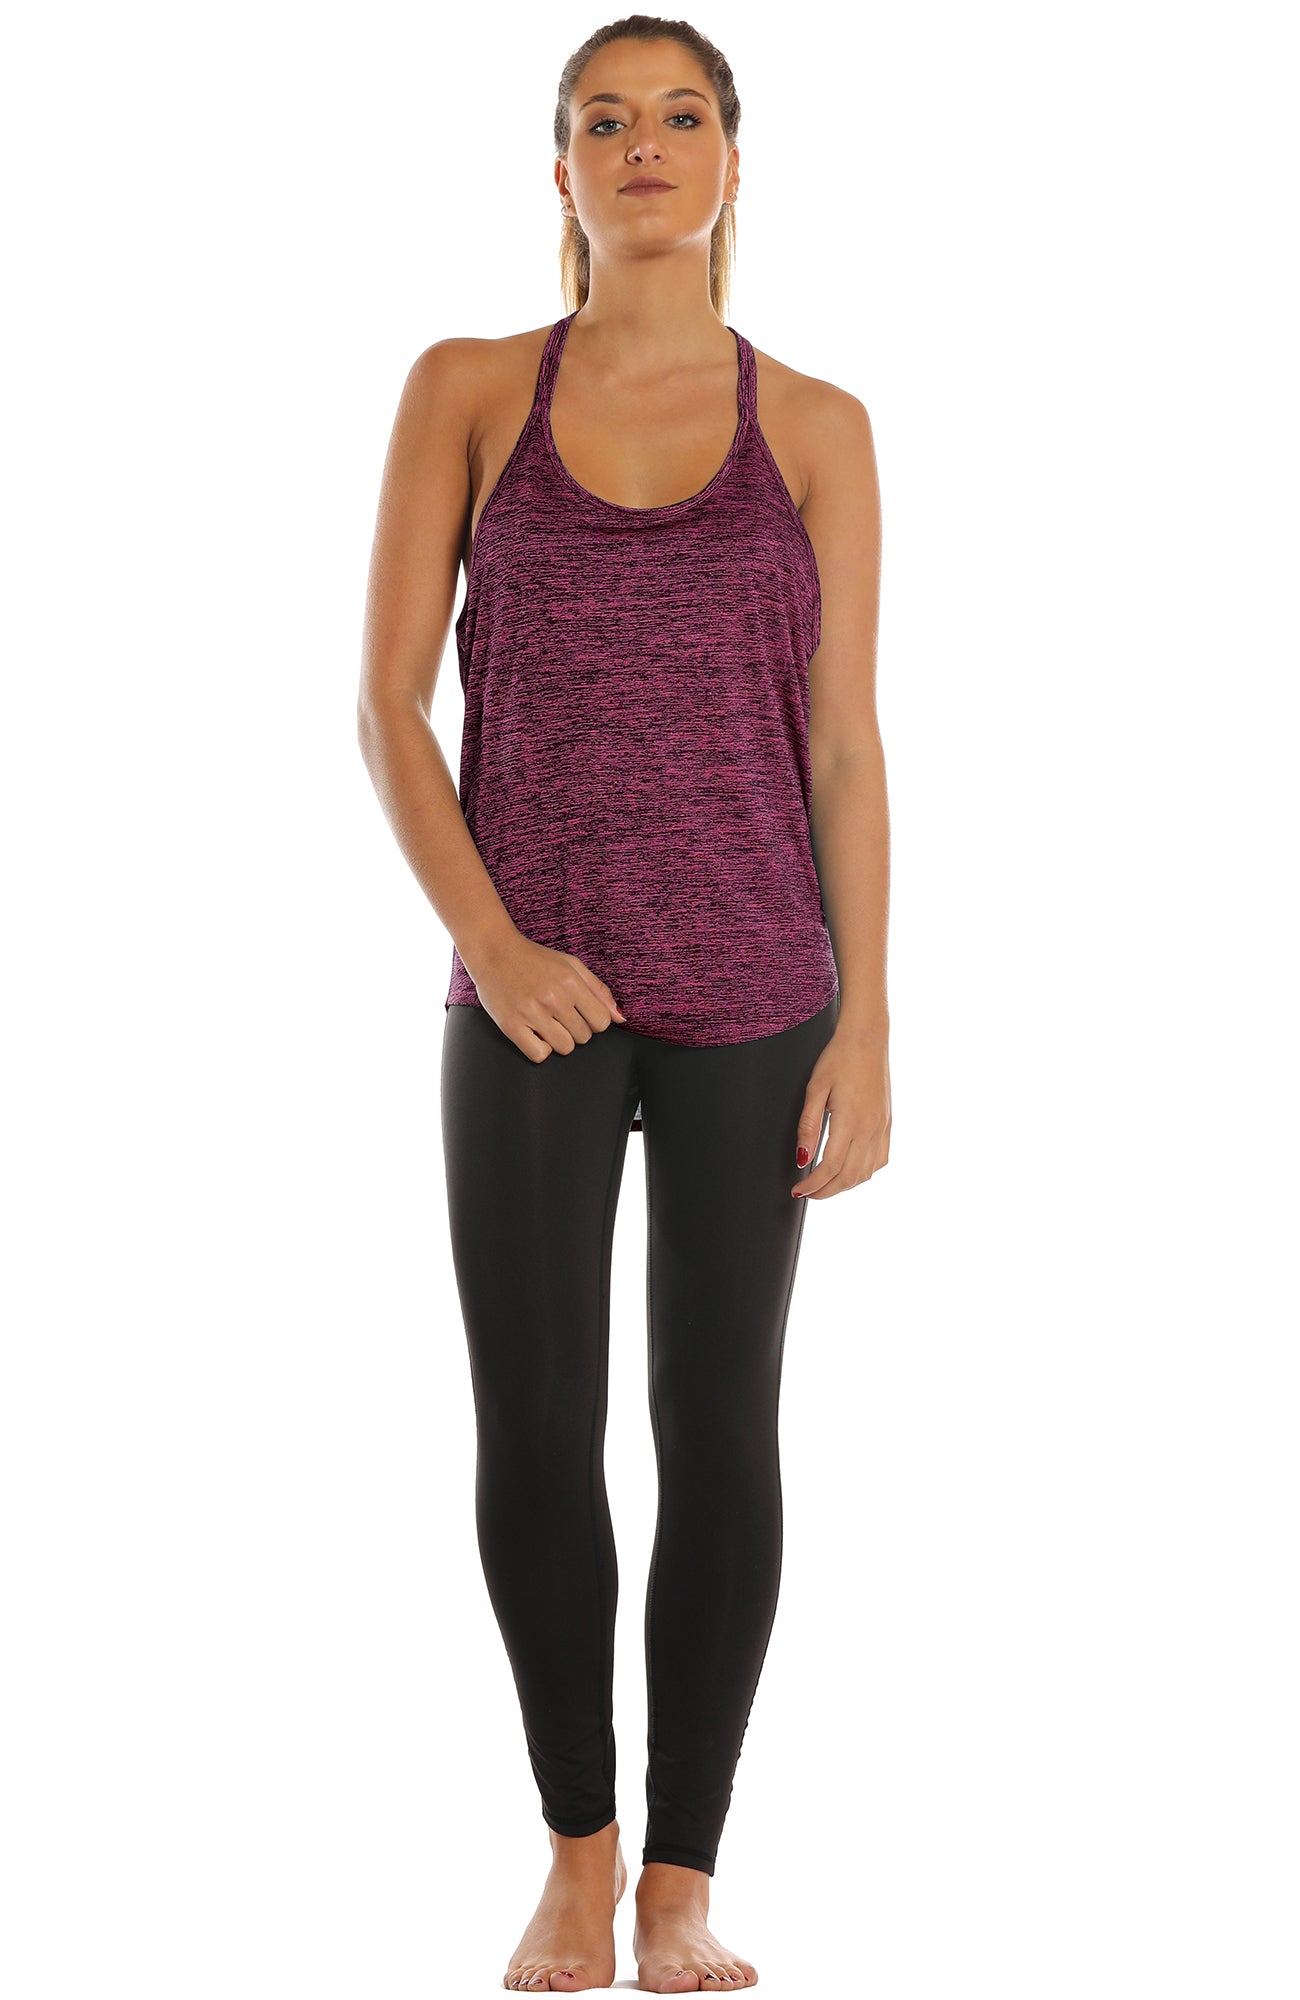 TK27 icyzone Workout Tank Tops for Women - Athletic Yoga Tops, T